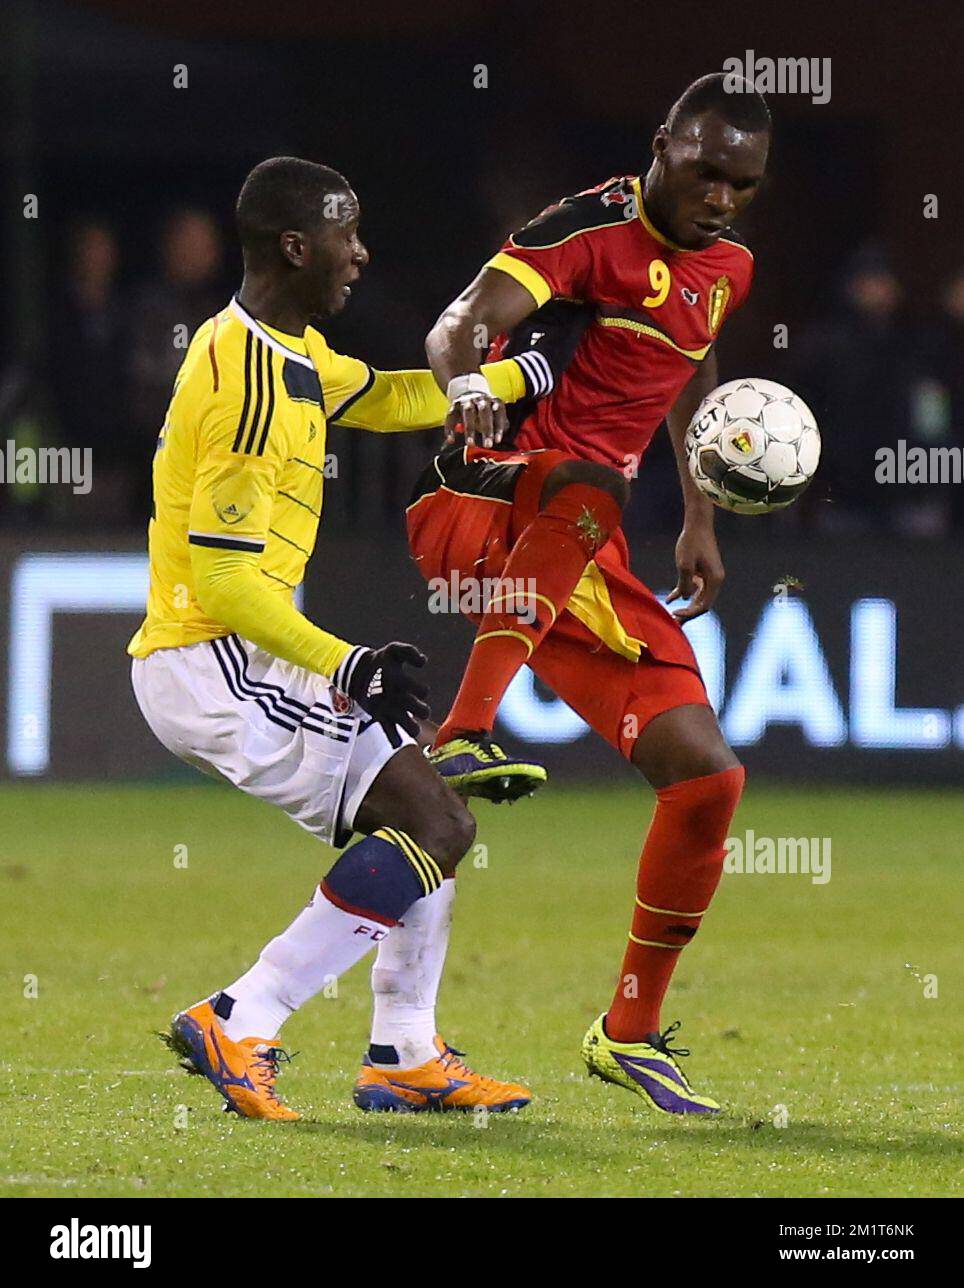 Colombia's Cristian Zapata and Belgium's Christian Benteke fight for the ball during a friendly soccer game between the Belgian national soccer team Red Devils and Colombia, at the Koning Boudewijn Stadion - Stade Roi Baudouin in Brussels, on Thursday 14 November 2013. BELGA PHOTO VIRGINIE LEFOUR Stock Photo